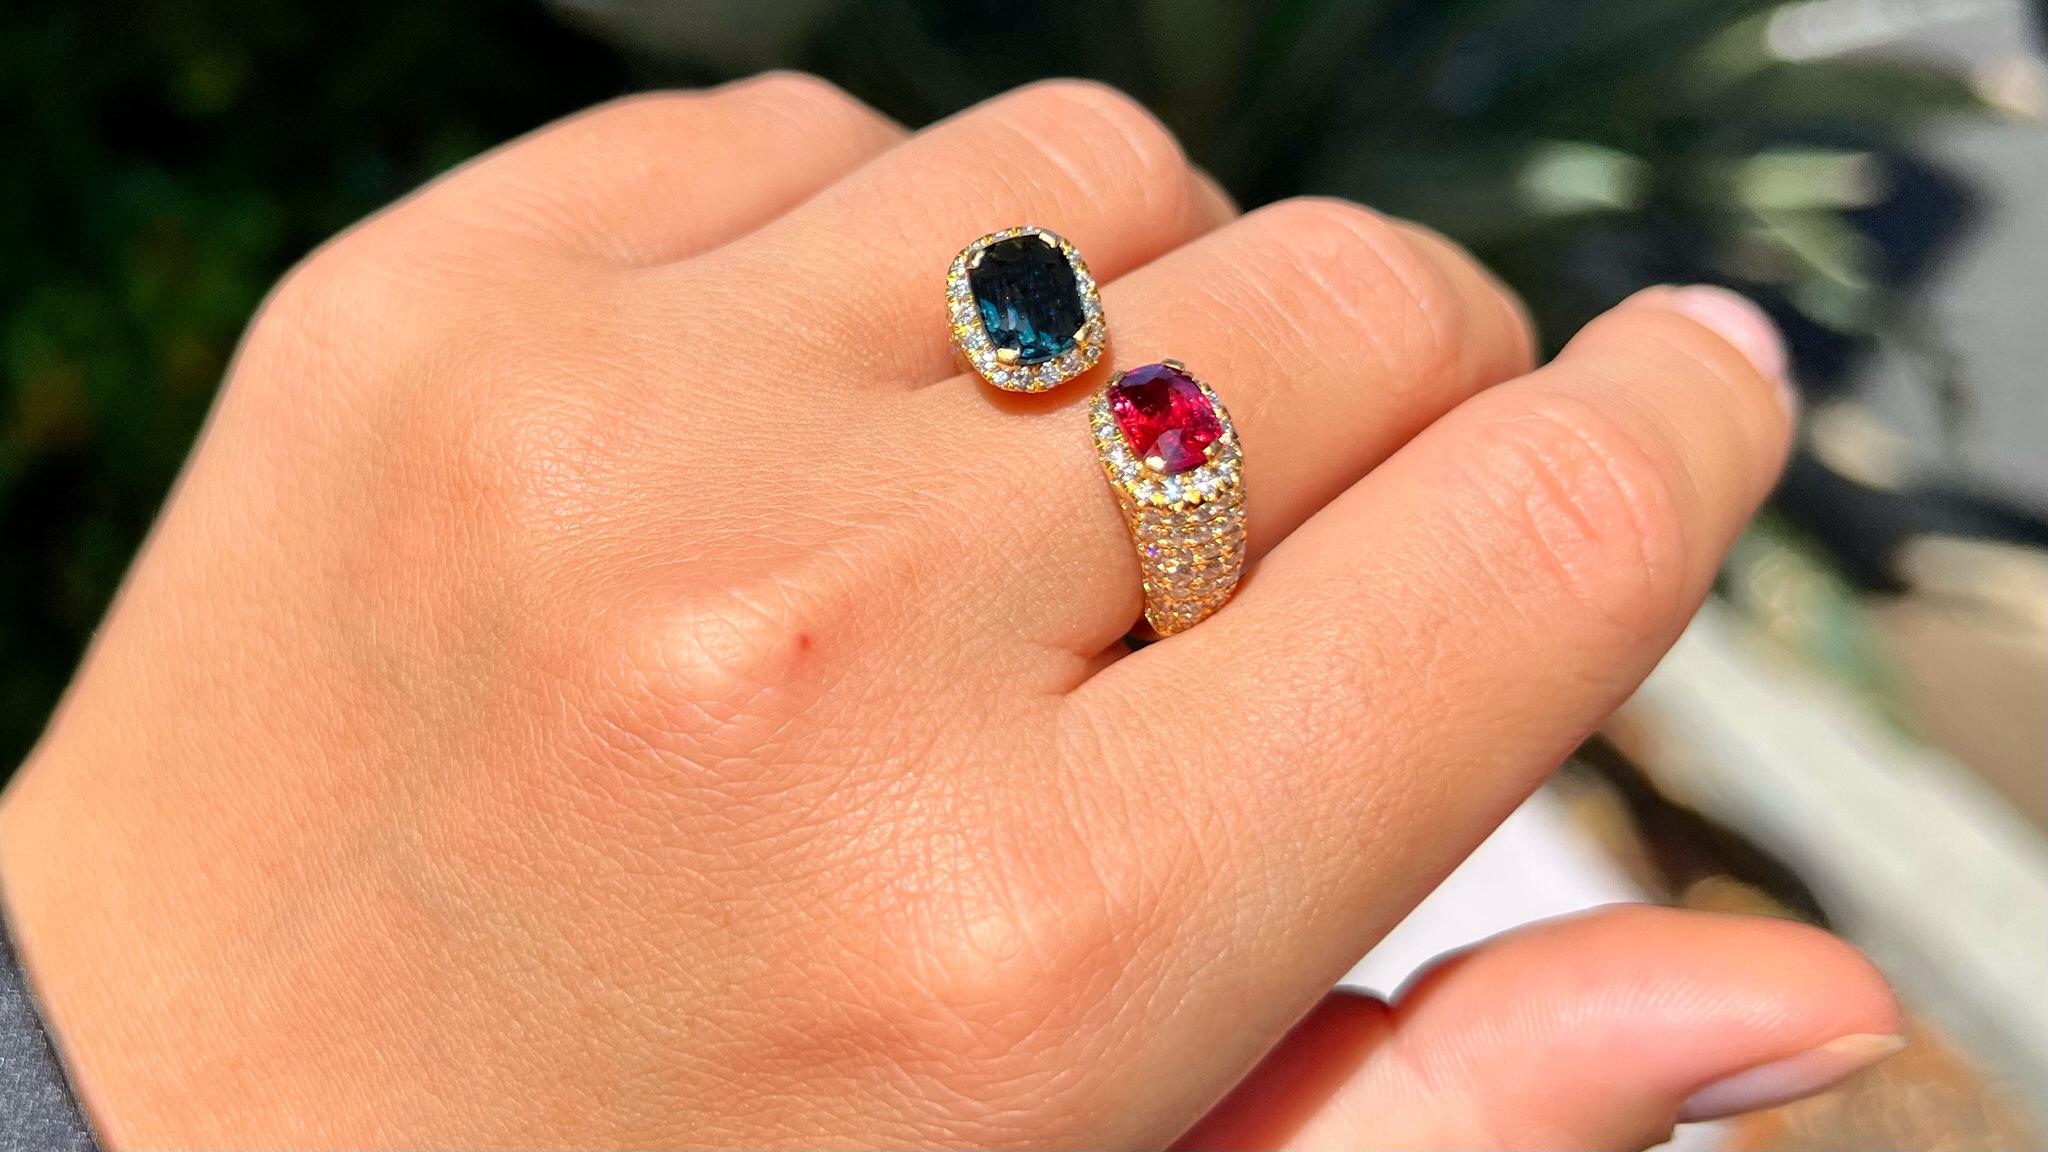 Rare Nature Blue and Red Spinel Bypass Ring Diamond Setting 4 Carats 18K Gold Excellent état - En vente à Laguna Niguel, CA